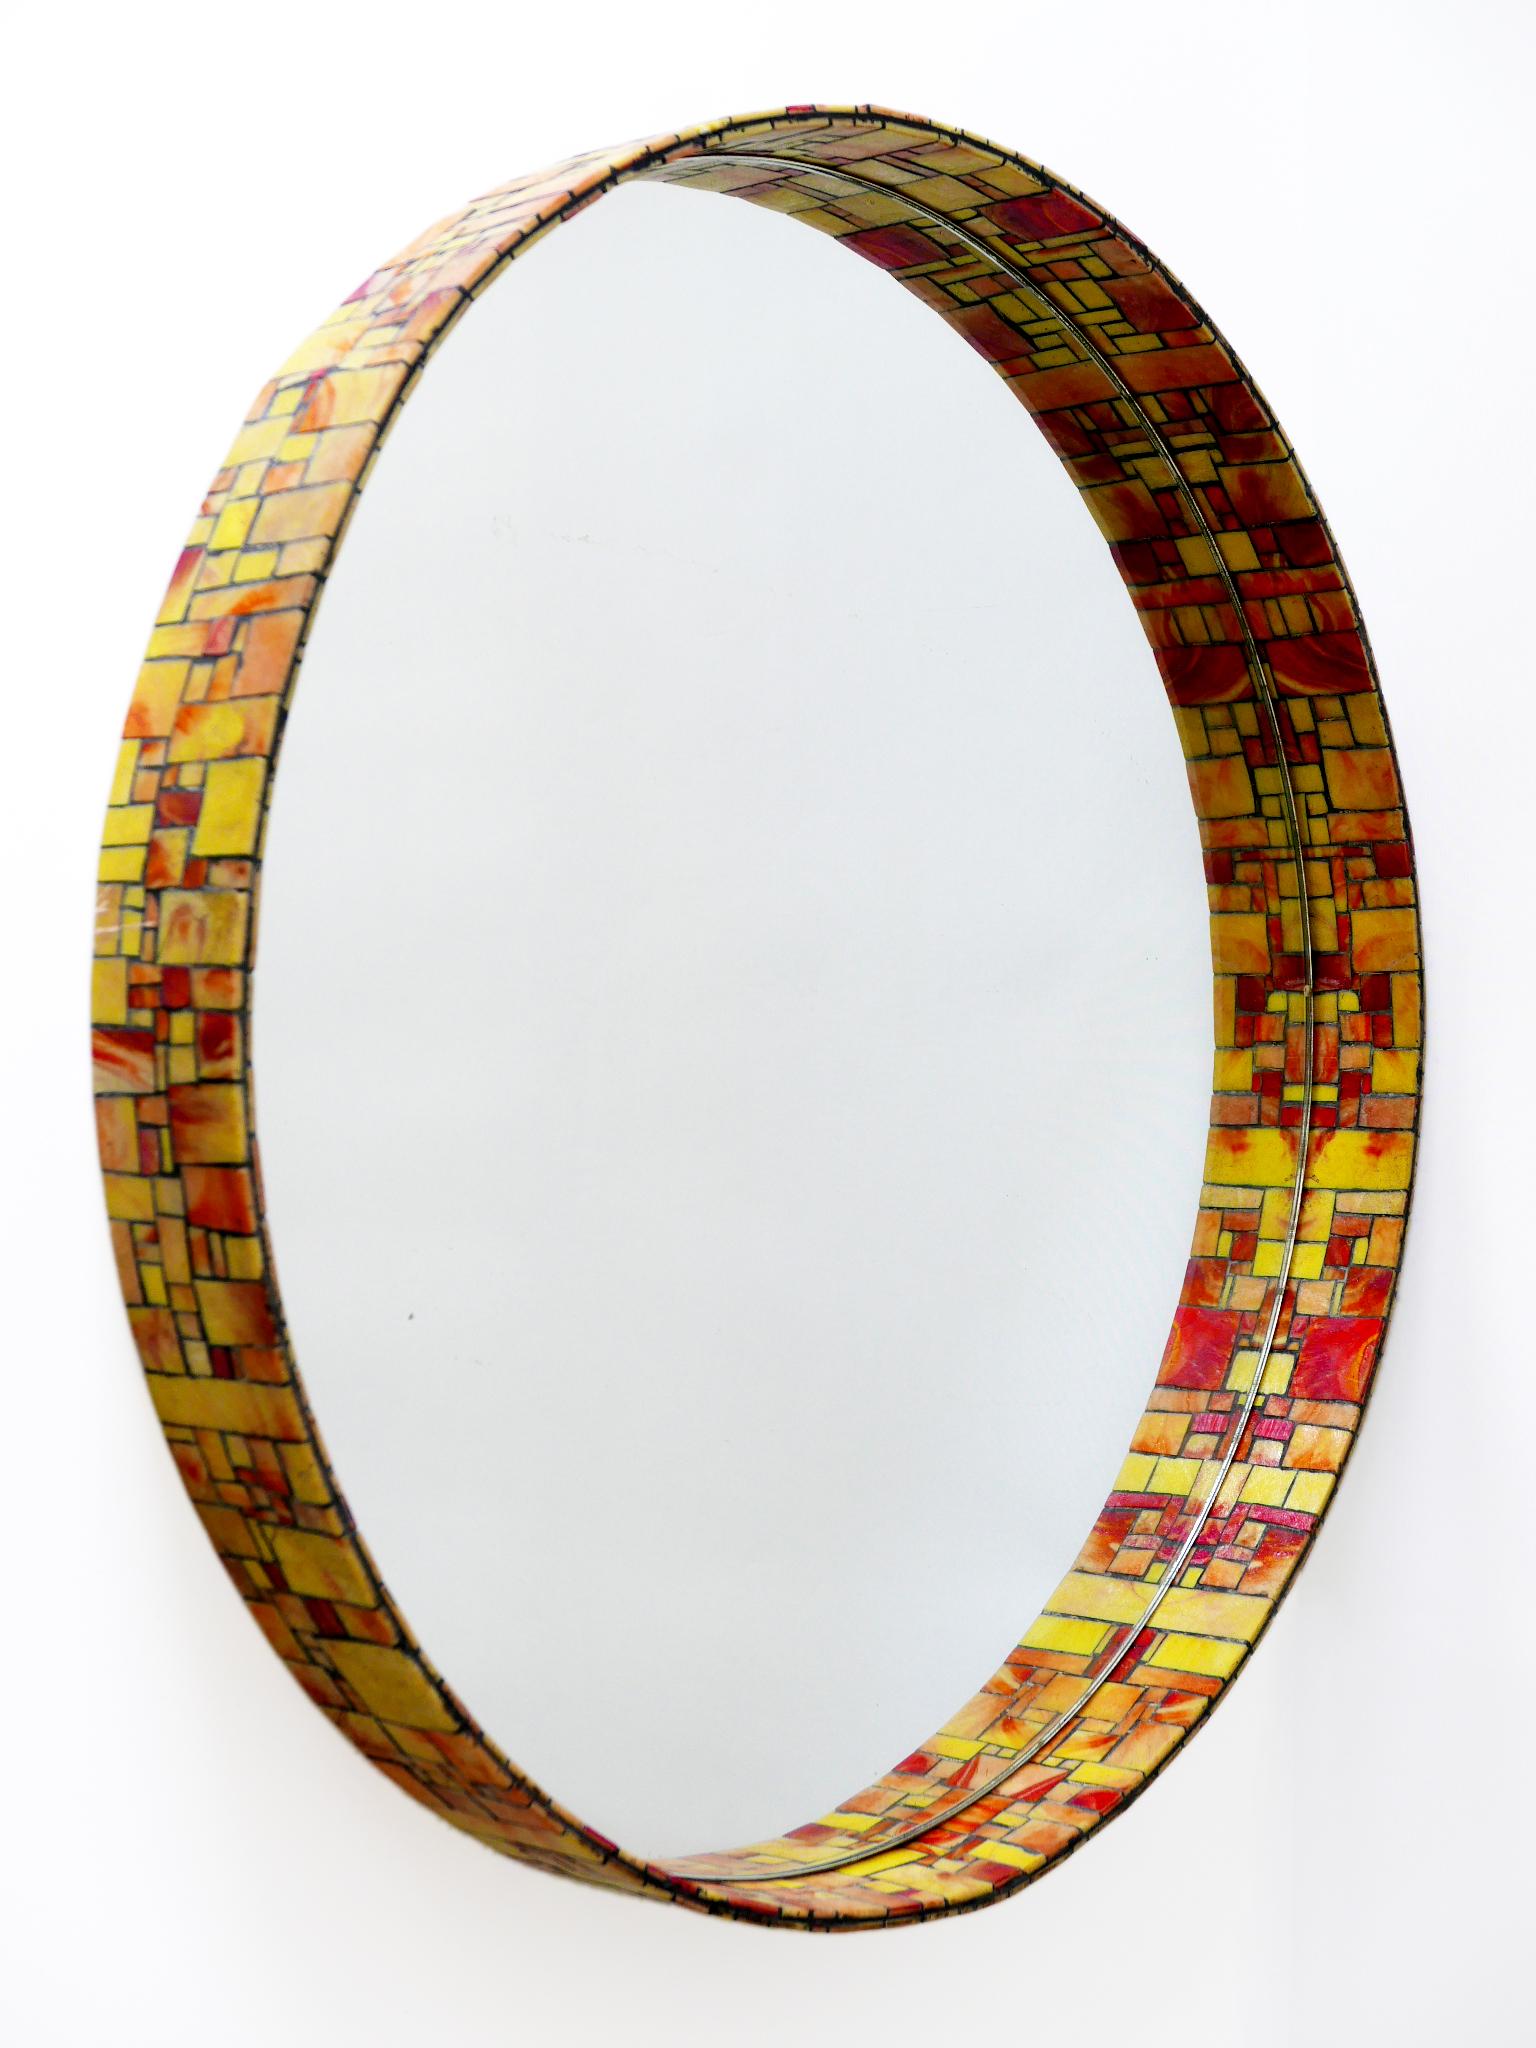 Exceptional Mid-Century Modern Mosaic Framed Circular Wall Mirror, Italy, 1960s For Sale 4